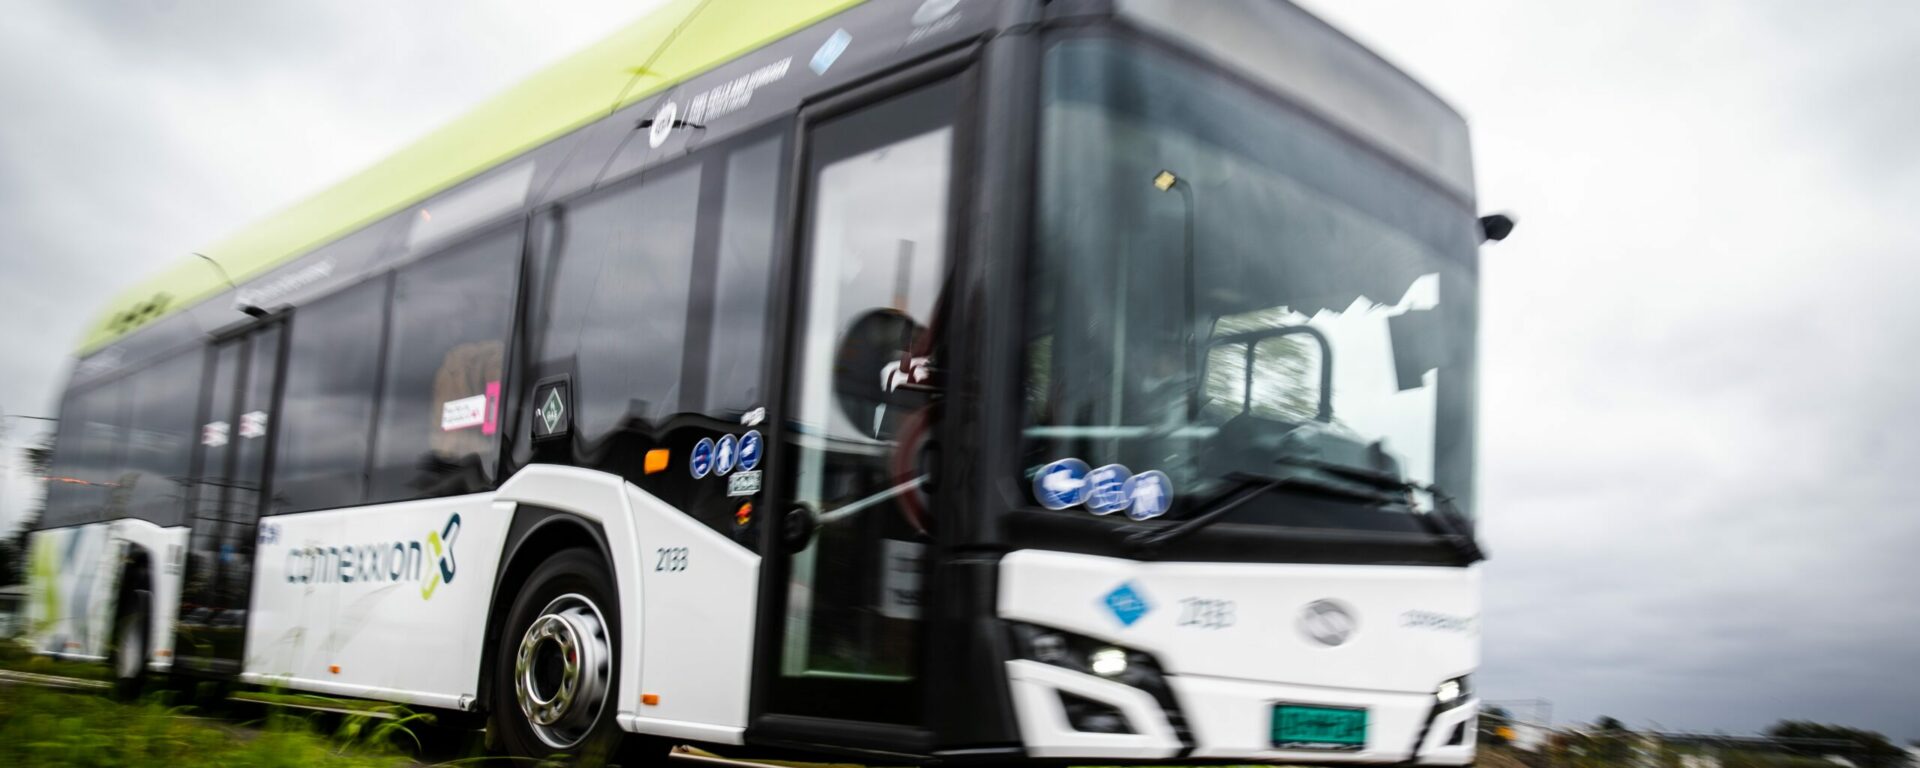 transdevs-first-hydrogen-buses-have-arrived-zuid-holland